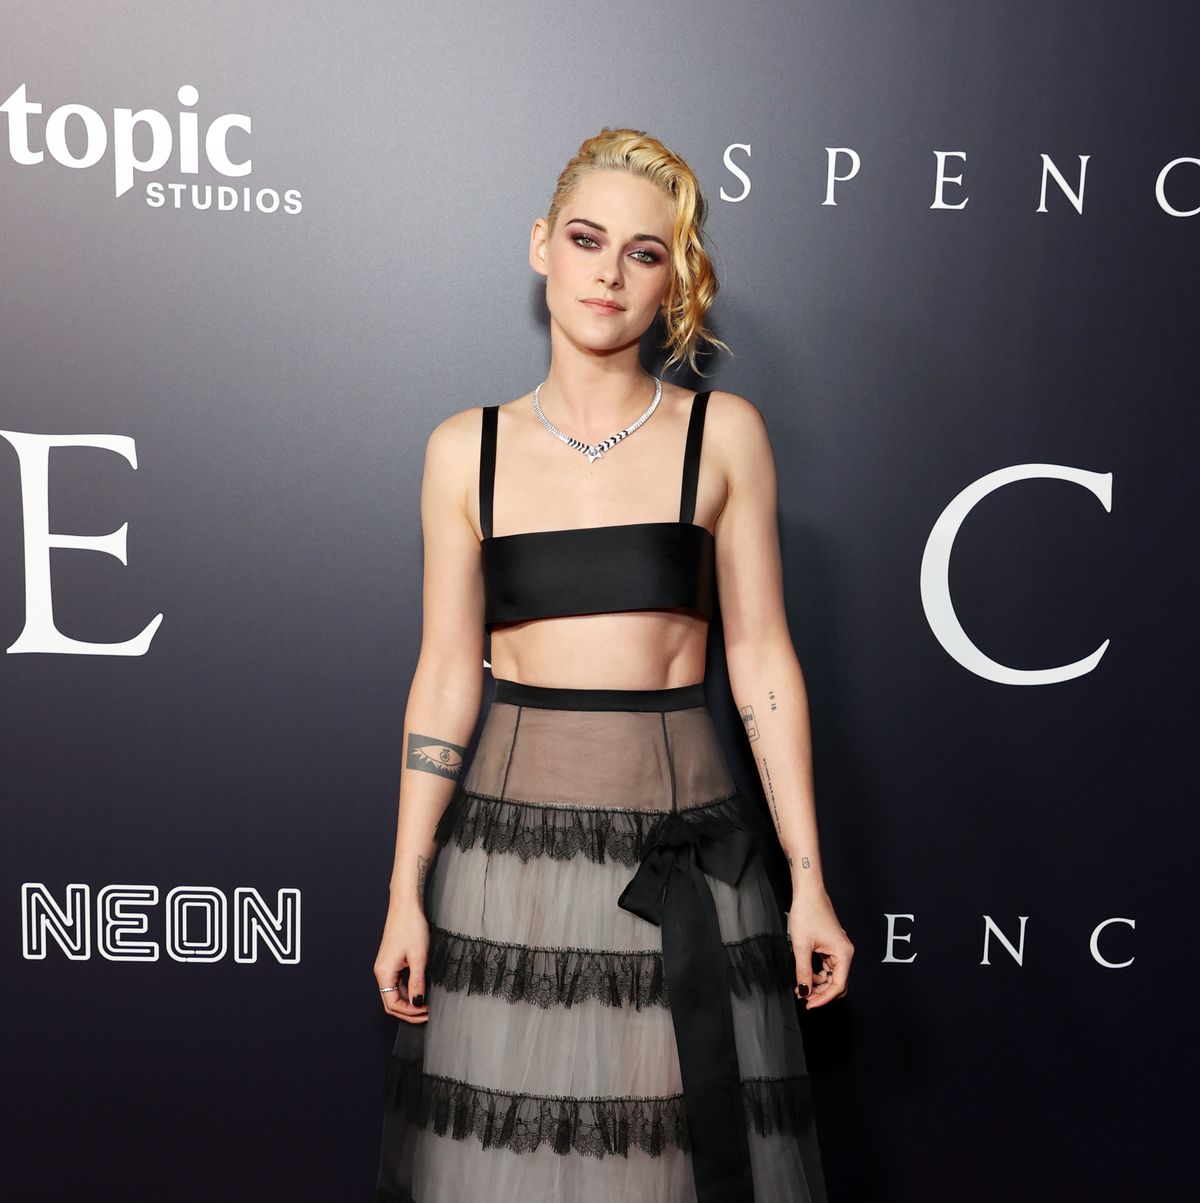 See Kristen Stewart's Edgy Chanel Gown at L.A. 'Spencer' Premiere